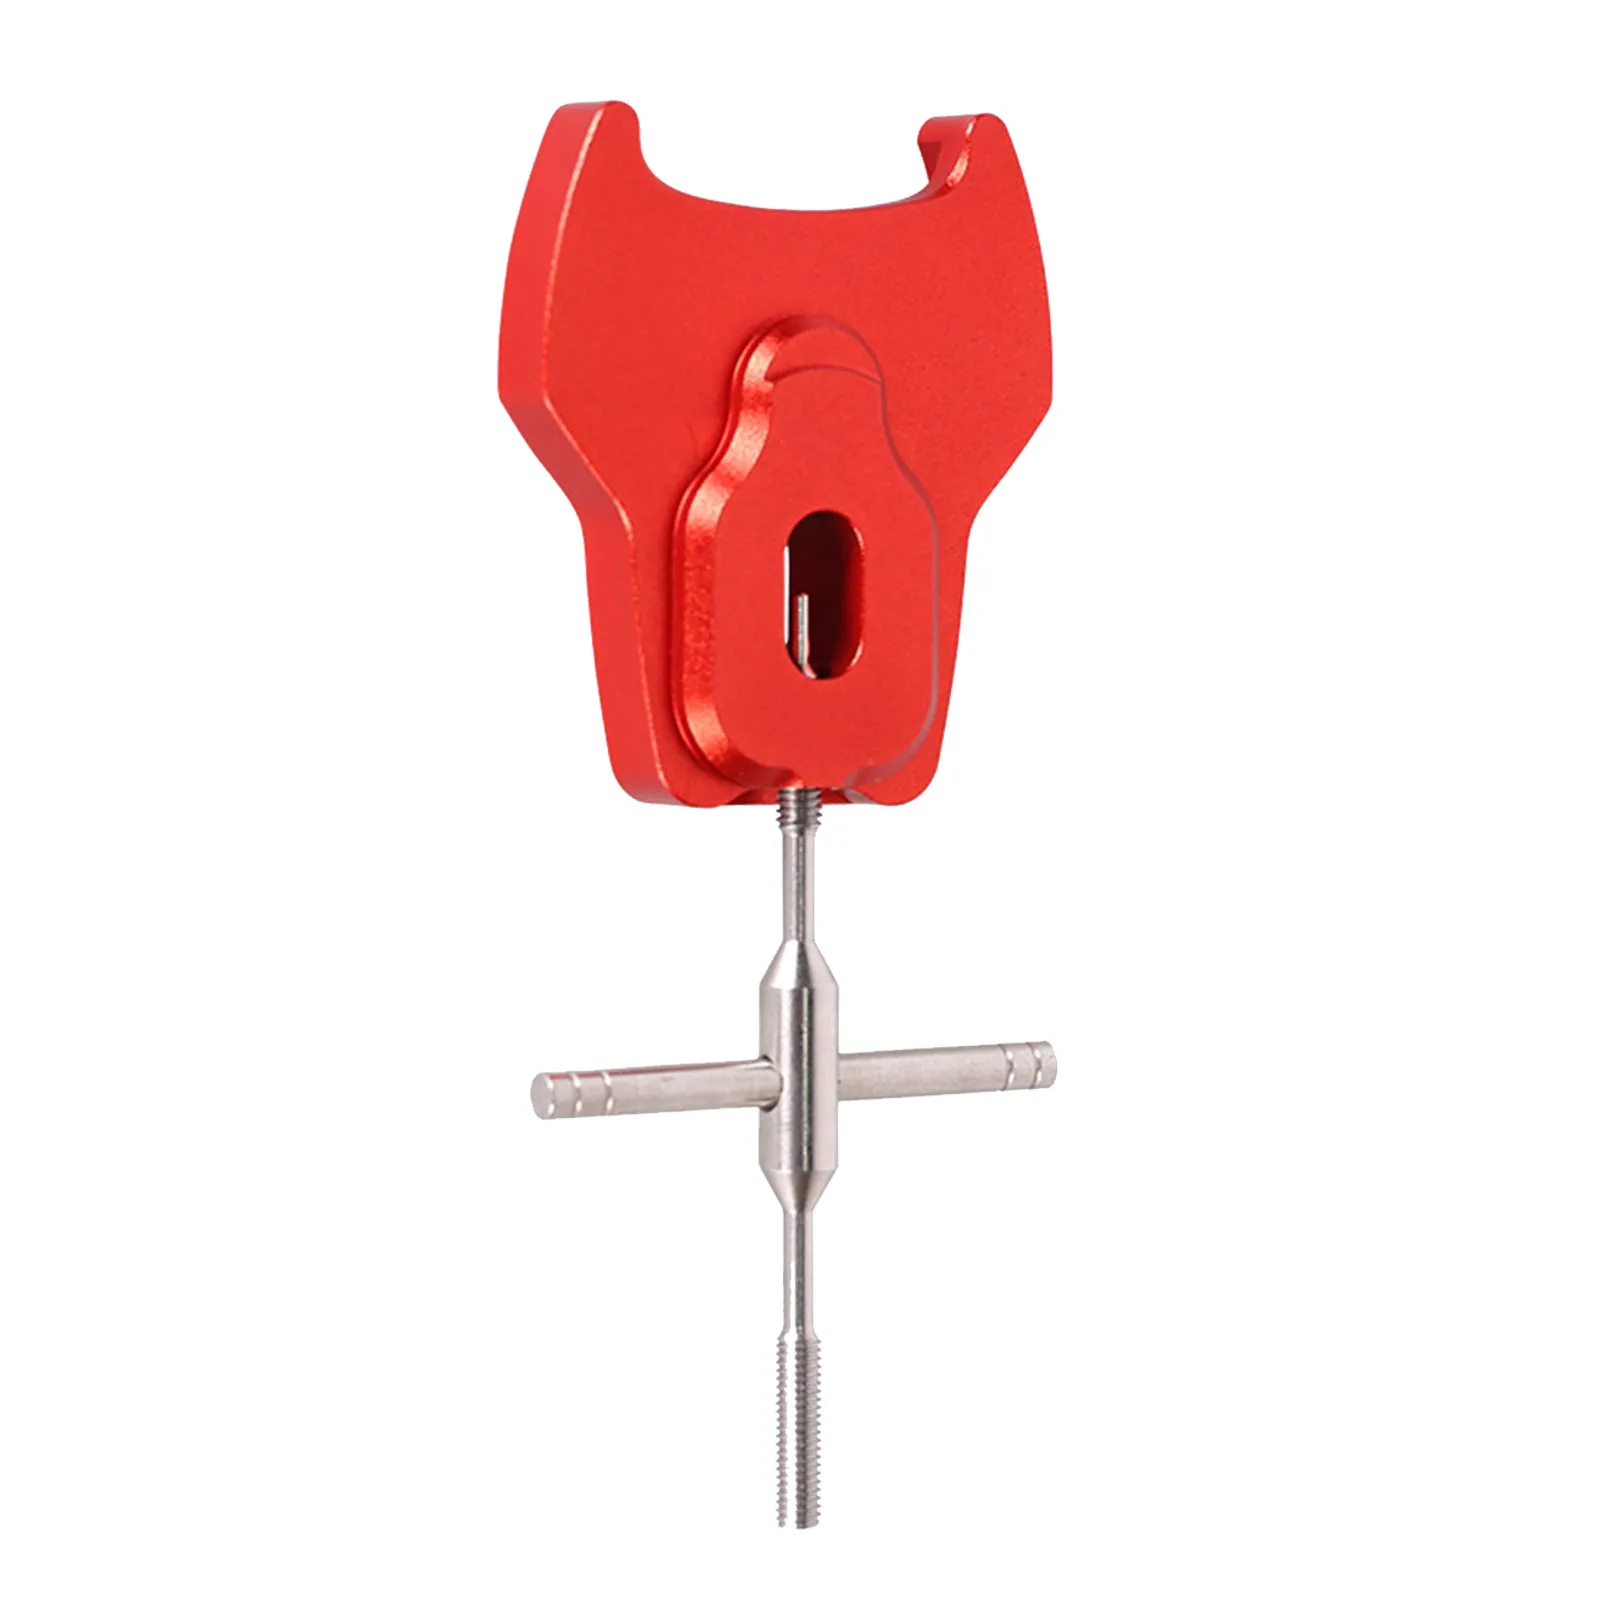 Reel Bearing Remover Tool Durable Spool Bearing Pin Remover Easy To Use Aluminum Alloy Spool Dismantling Fishing Device